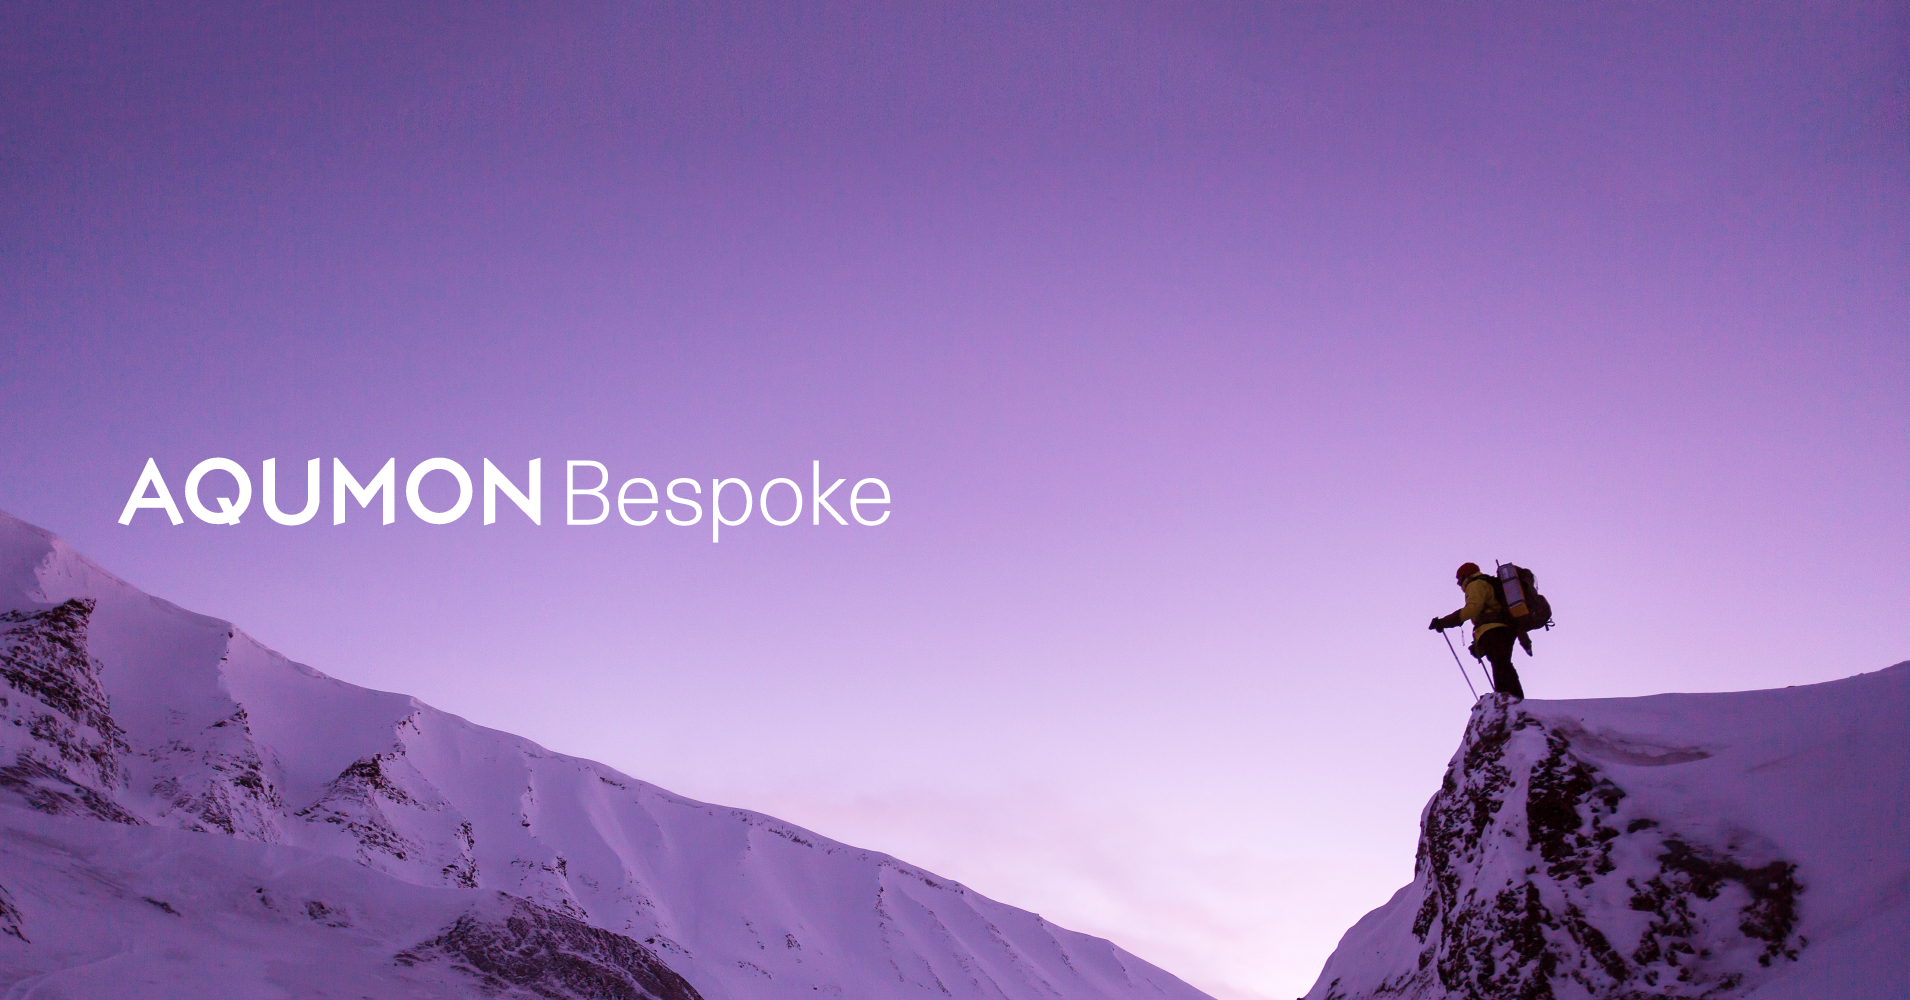 Bespoke: Exceptional Investments for the Professional Investor